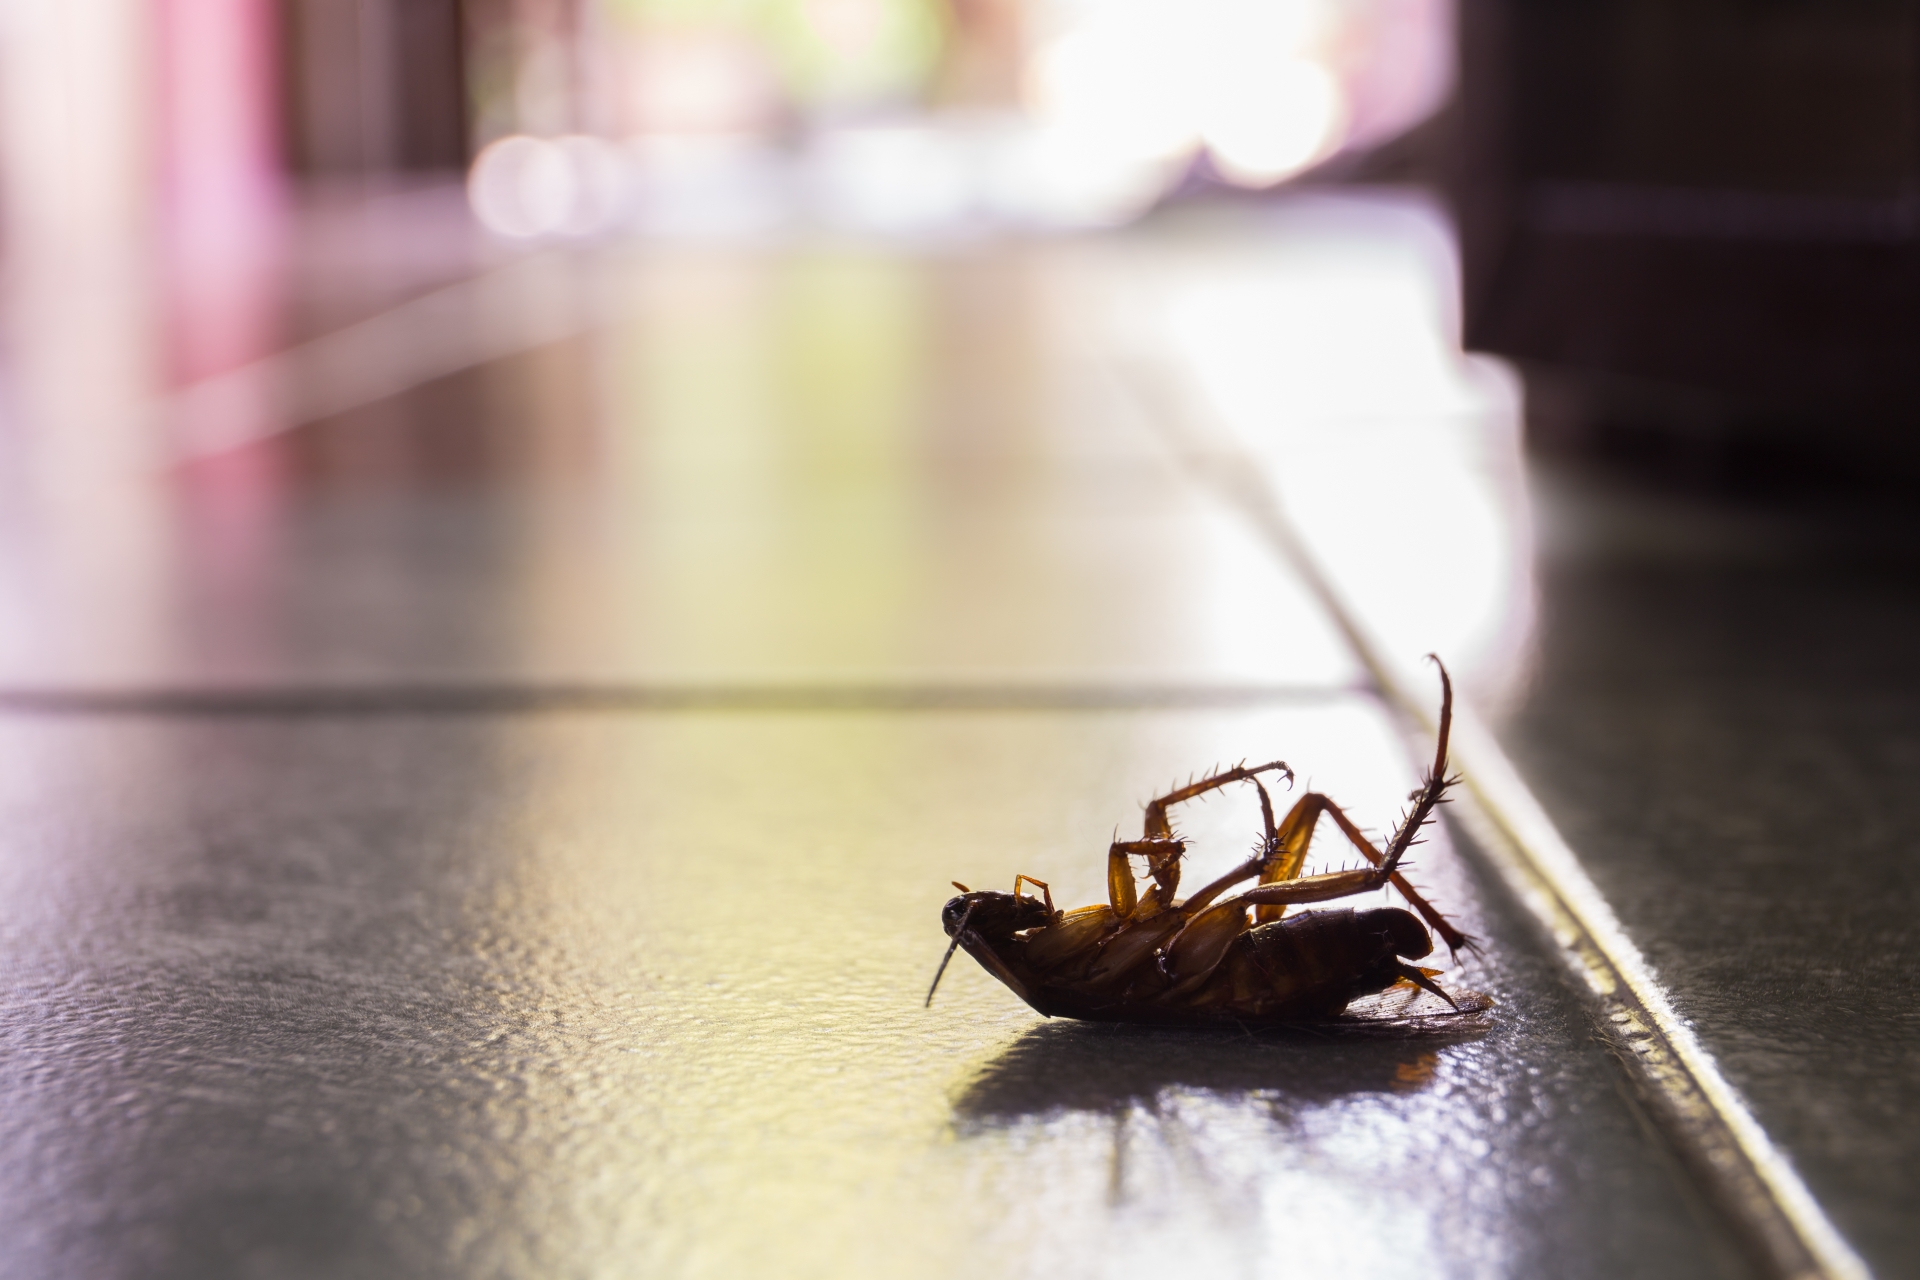 Cockroach Control, Pest Control in Abbots Langley, Bedmond, WD5. Call Now 020 8166 9746